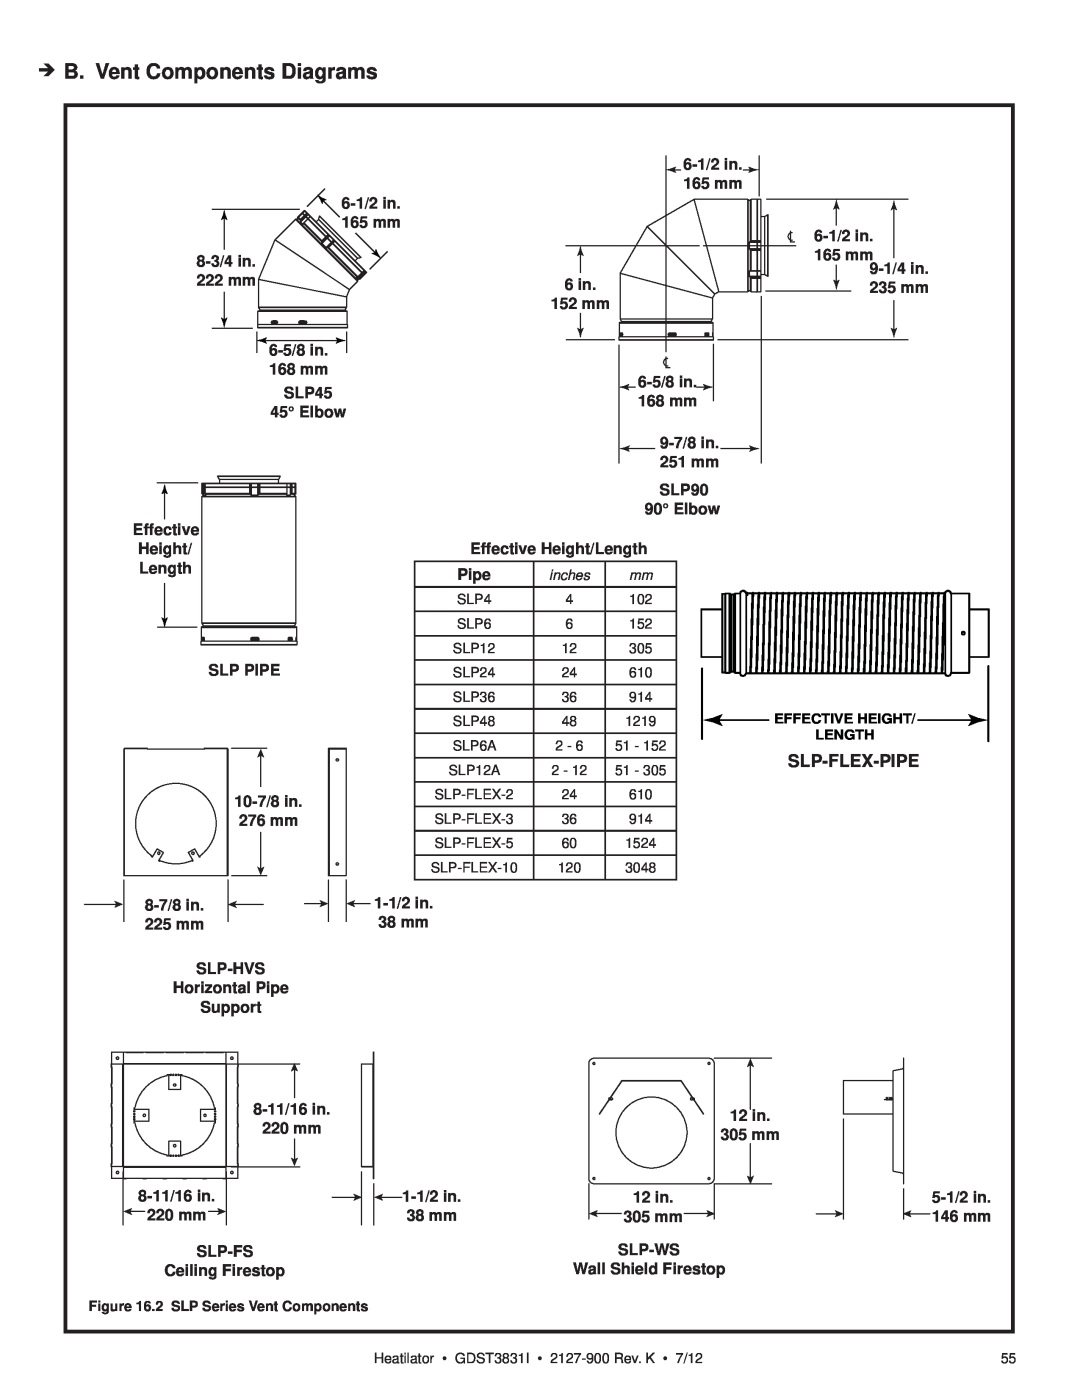 Heatiator GDST3831I B. Vent Components Diagrams, 6-1/2in 165 mm 8-3/4in 222 mm 6-5/8in 168 mm, SLP45 45 Elbow, 6 in, Pipe 